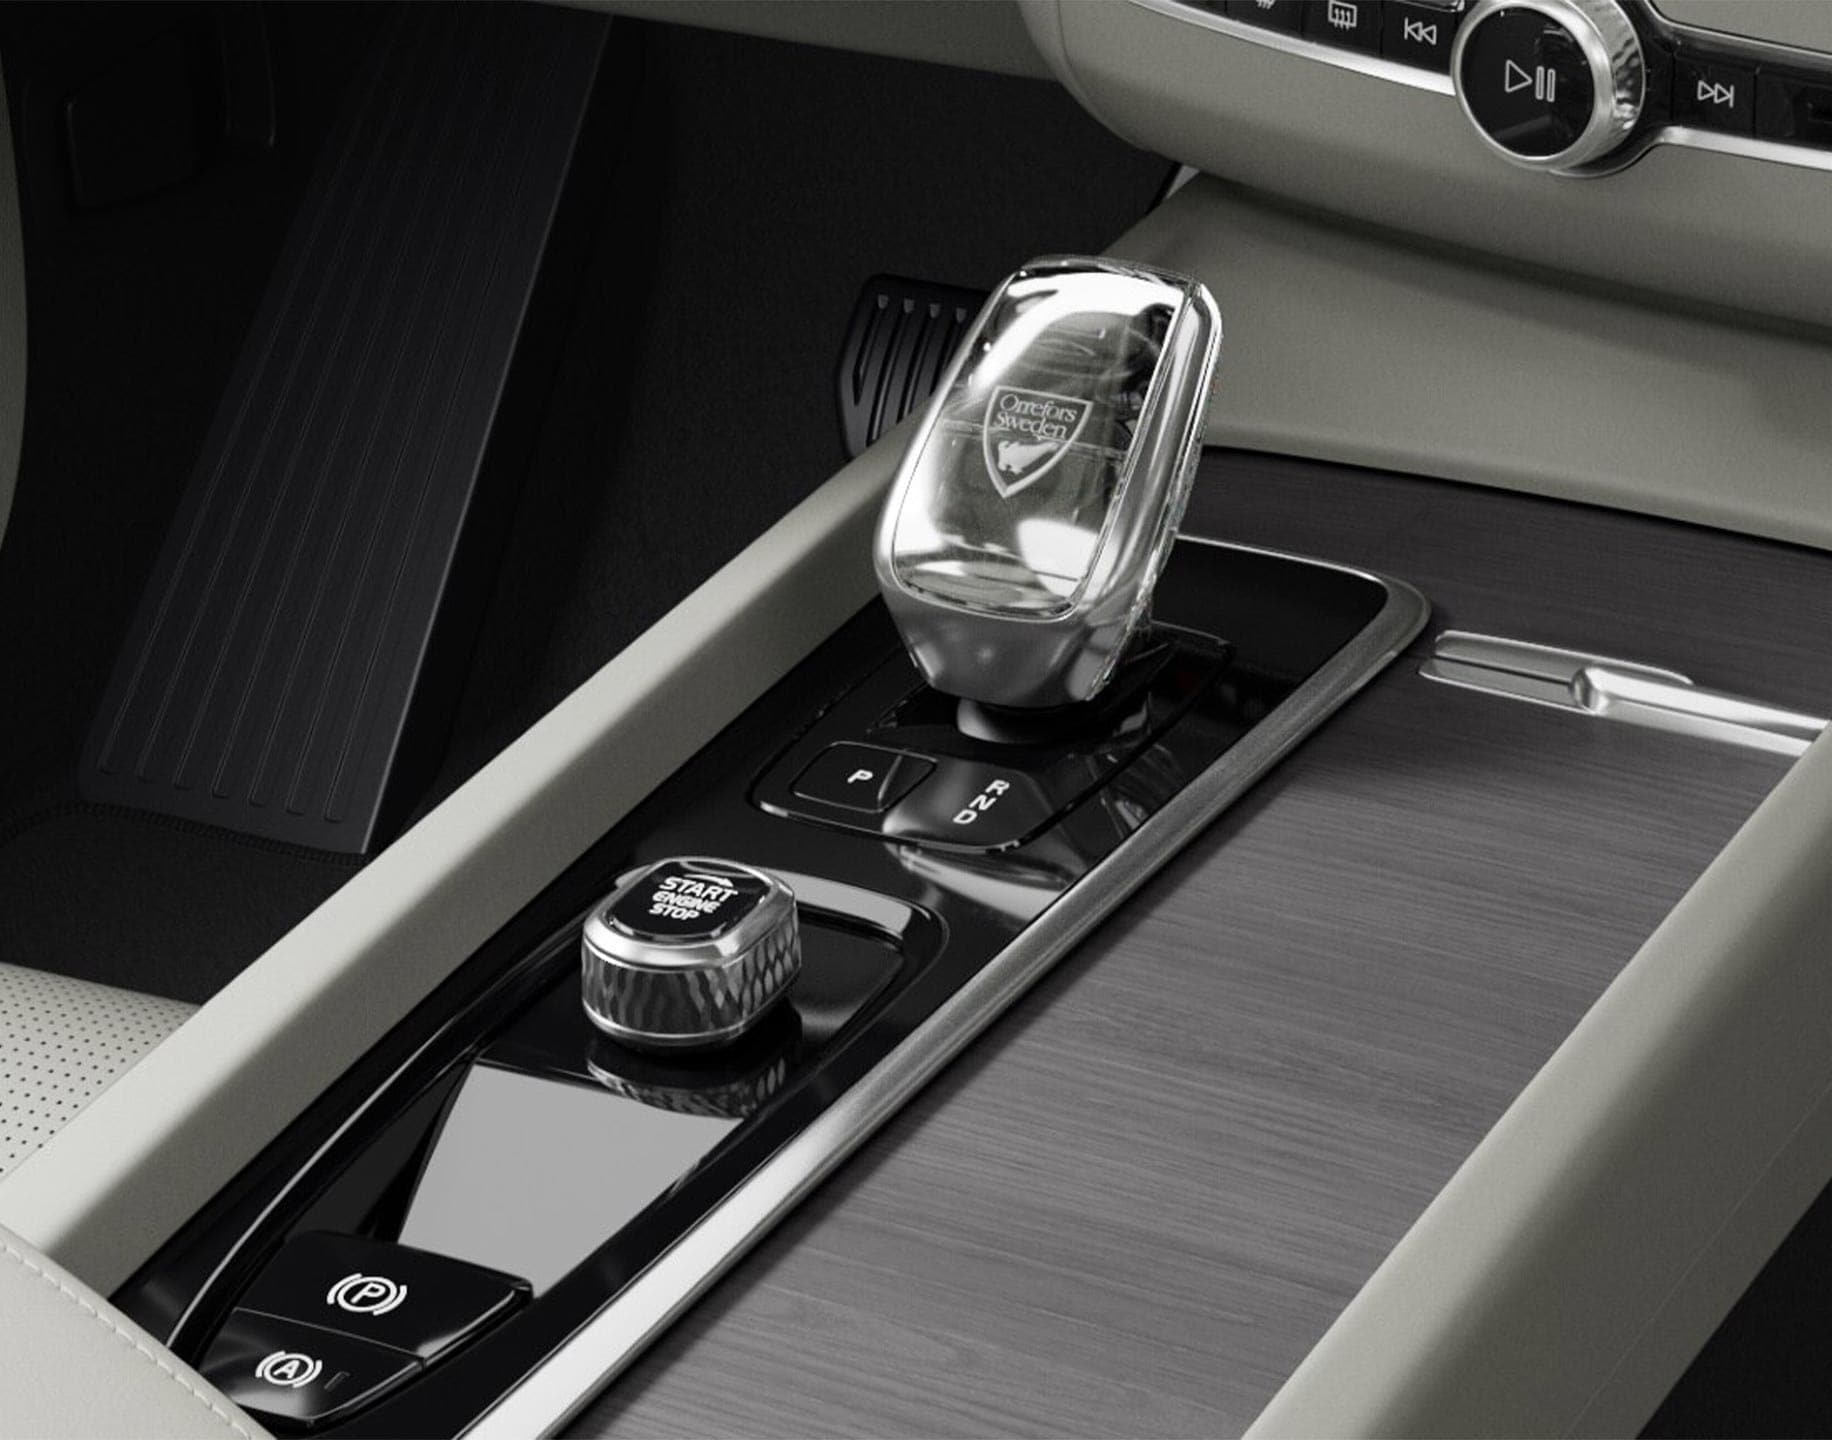 A close up of the gear shifter in a Volvo XC60 SUV.